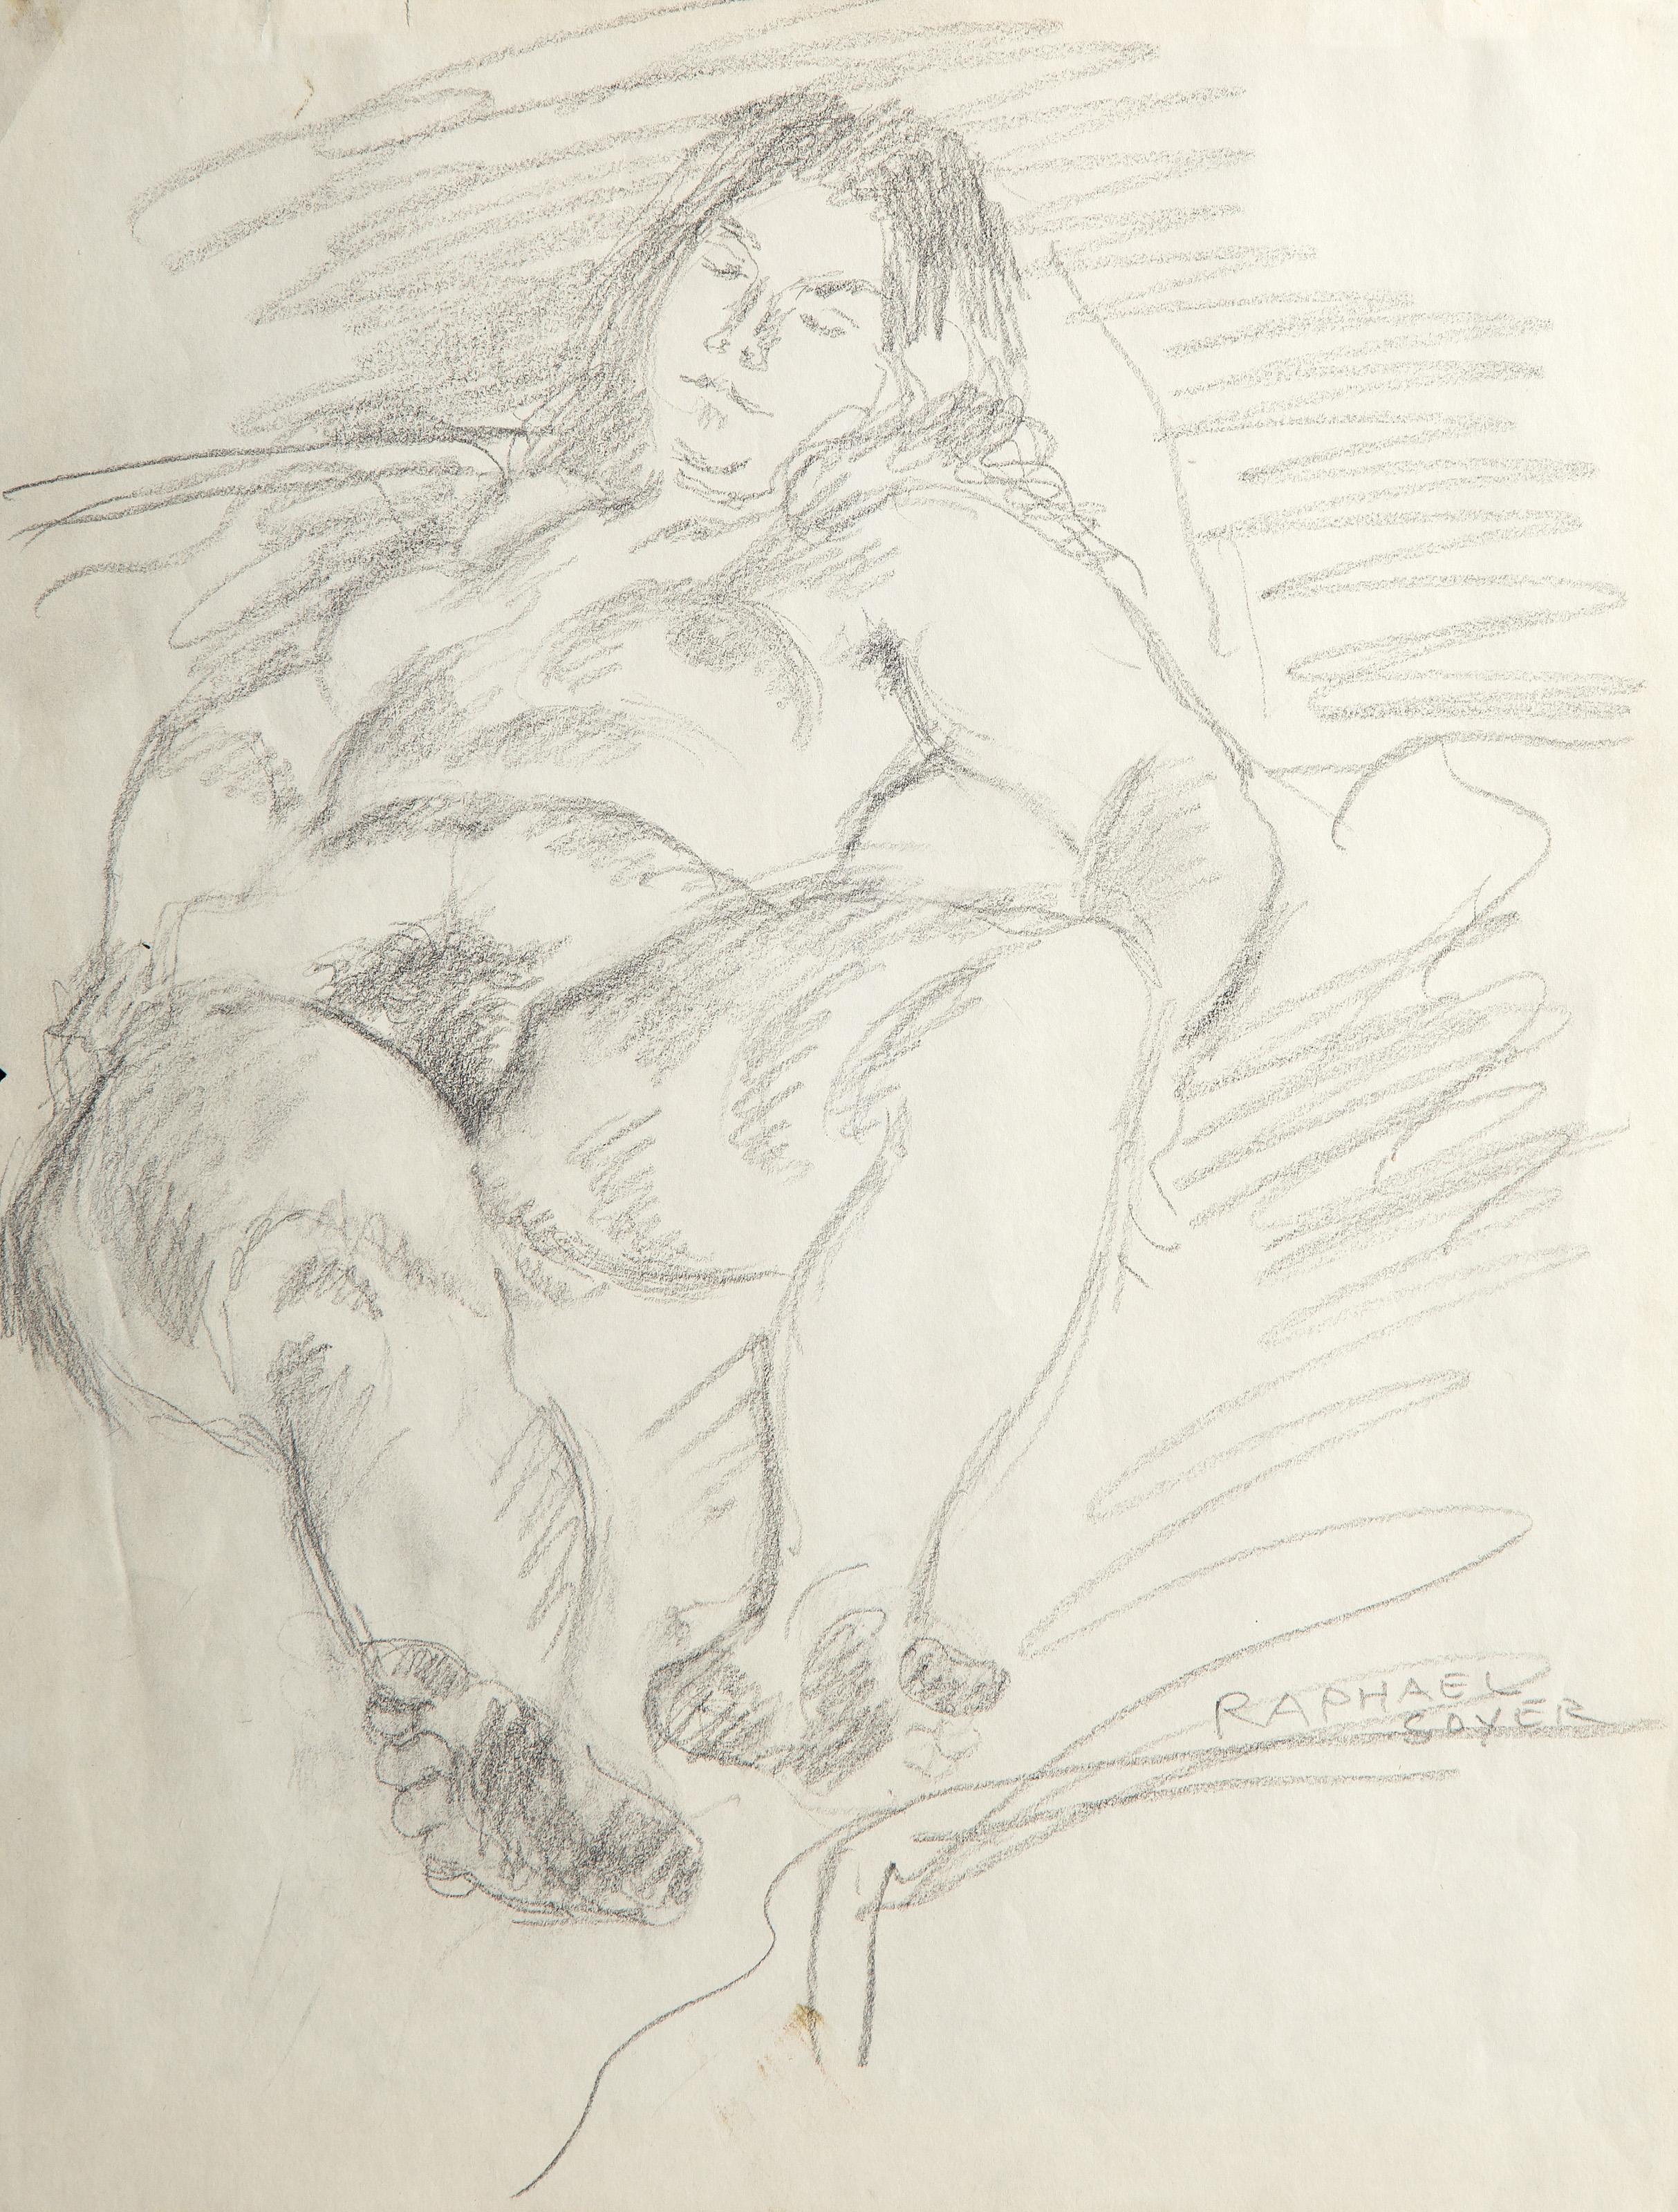 Raphael Soyer, Russian/American (1899 - 1987) -  Sleeping Woman. Medium: Graphite on Paper, signed in pencil, Size: 13.5 x 10.5 in. (34.29 x 26.67 cm) 